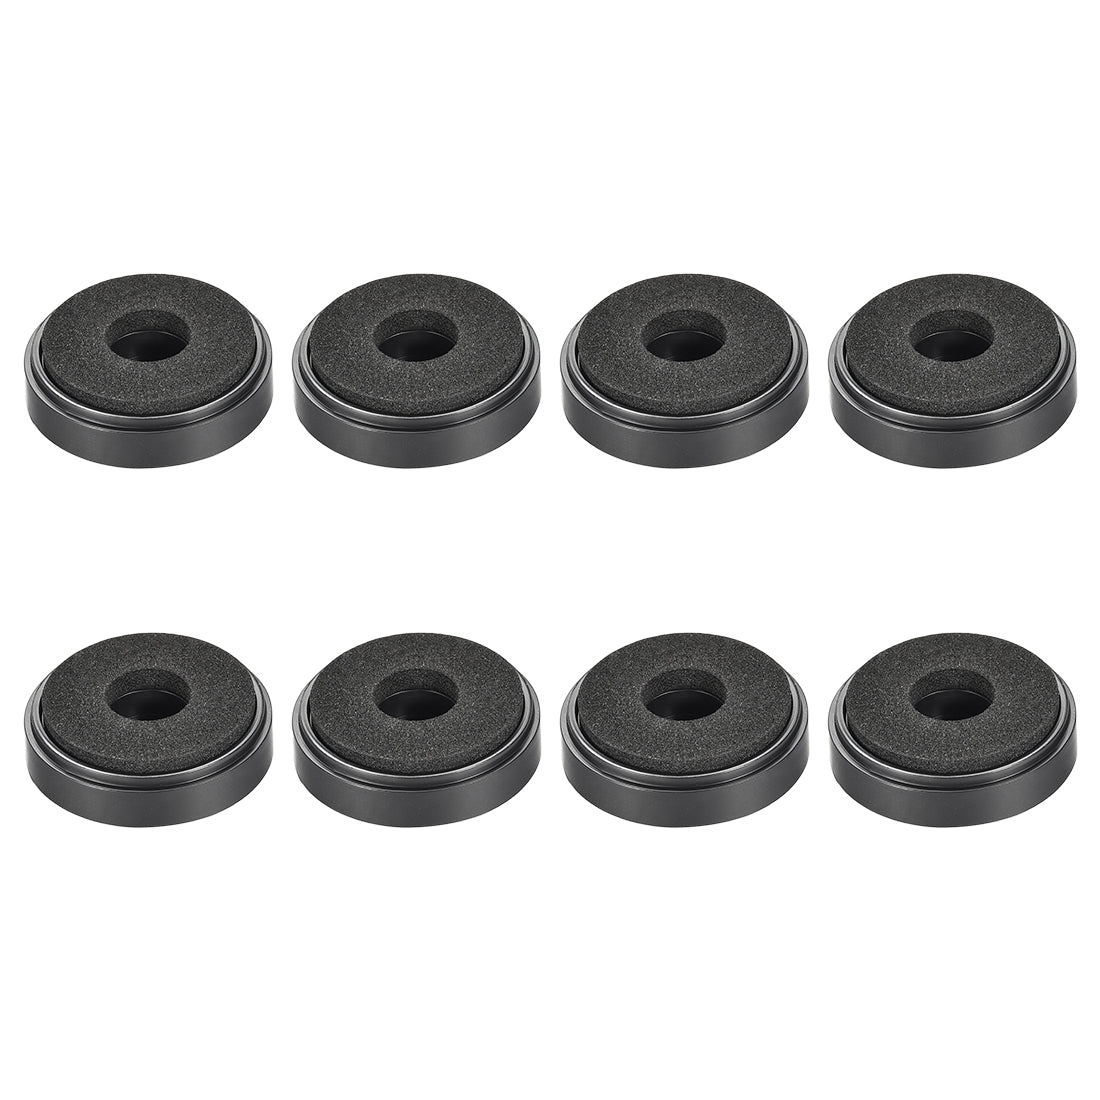 uxcell Uxcell 8 Pcs D30xH8mm Plastic Feet Anti-Vibration Base Pad Stand for Speaker Guitar Amplifier HiFi Black